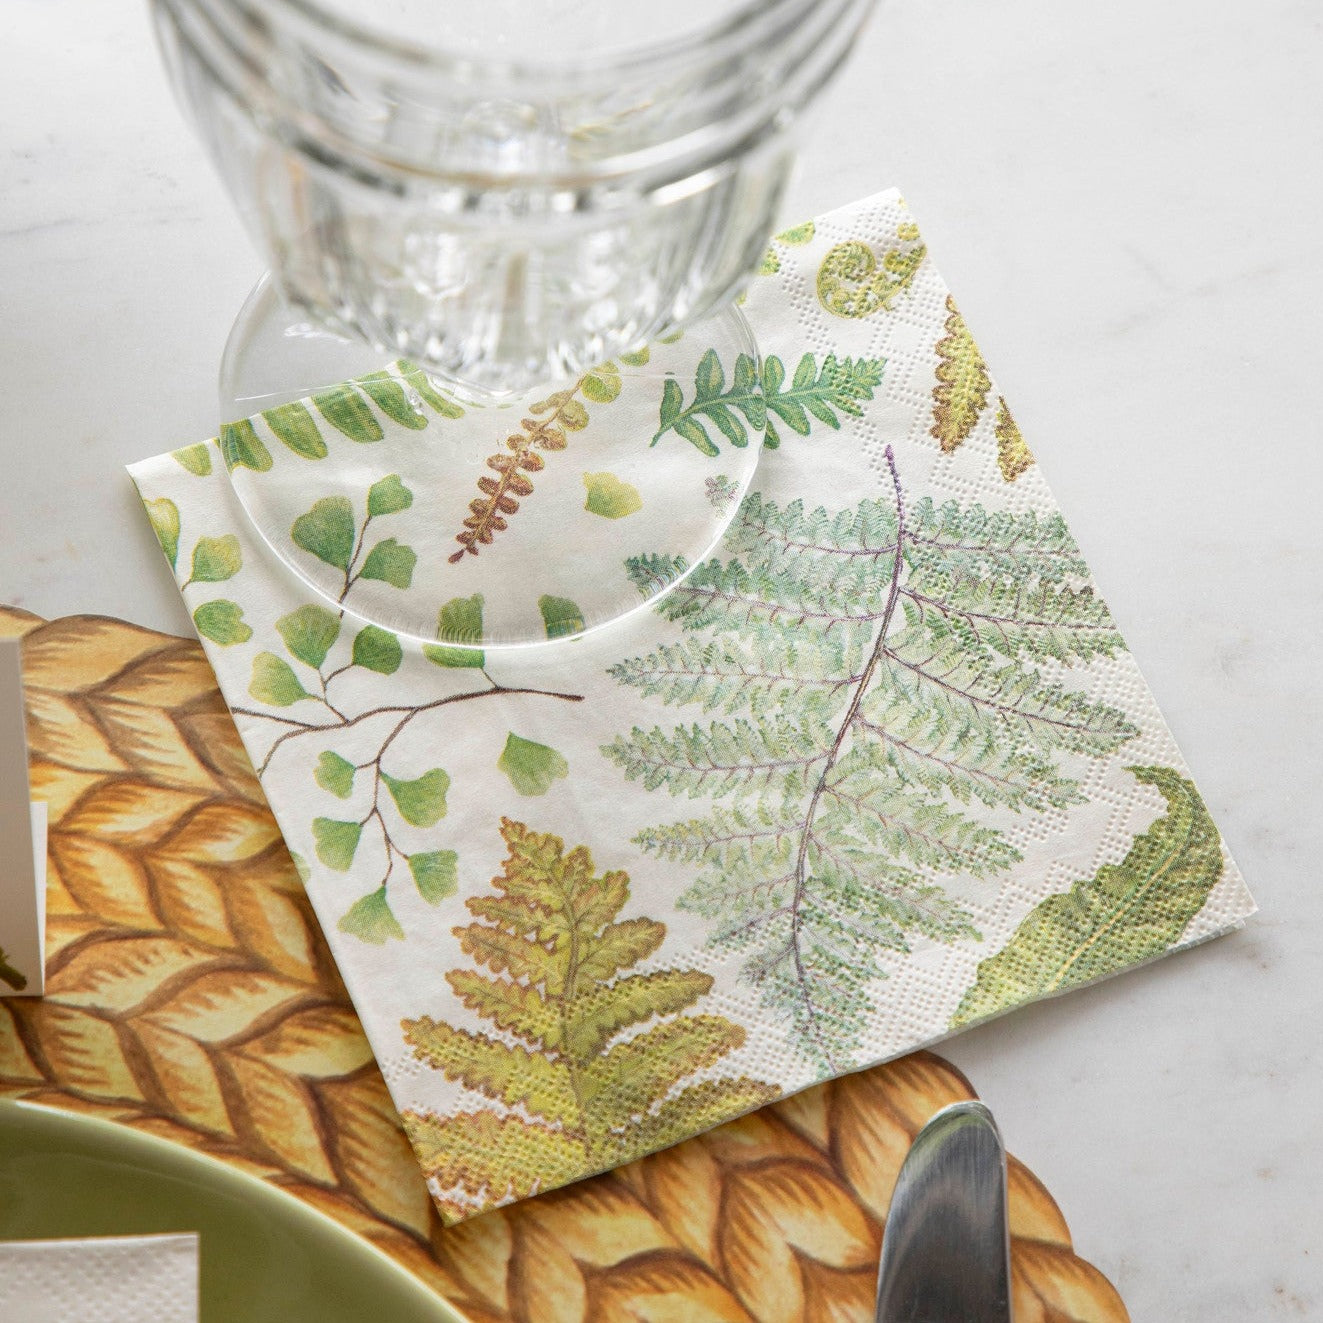 A Hester &amp; Cook Fern Napkin adorned with ferns and leaves.